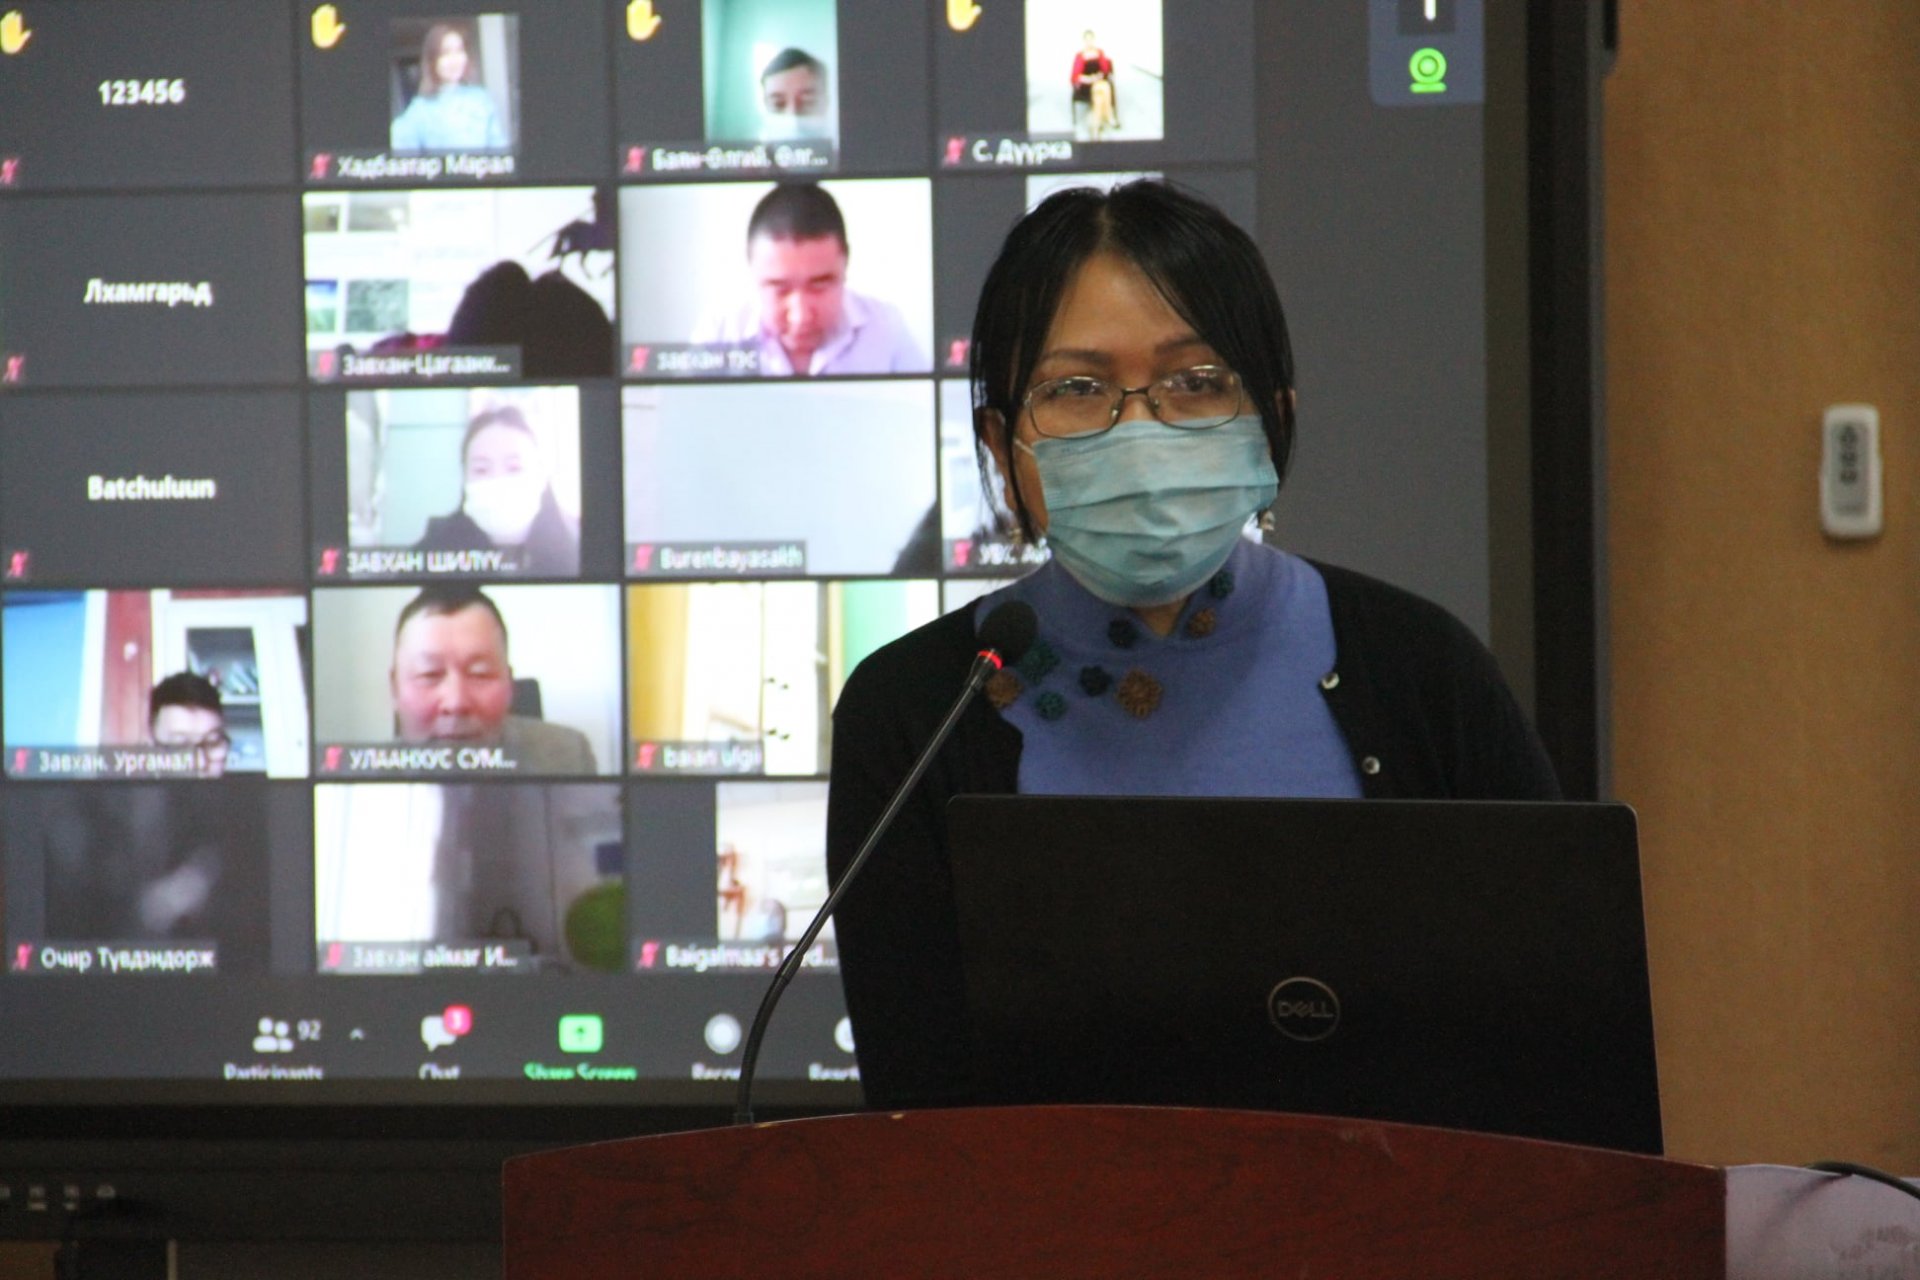 THE SCHOOL OF VETERINARY MEDICINE OF THE MONGOLIAN UNIVERSITY OF LIFE SCIENCES ESTABLISHED A SMART DISTANCE-LEARNING HALL AND ORGANIZED THE FIRST TRAINING